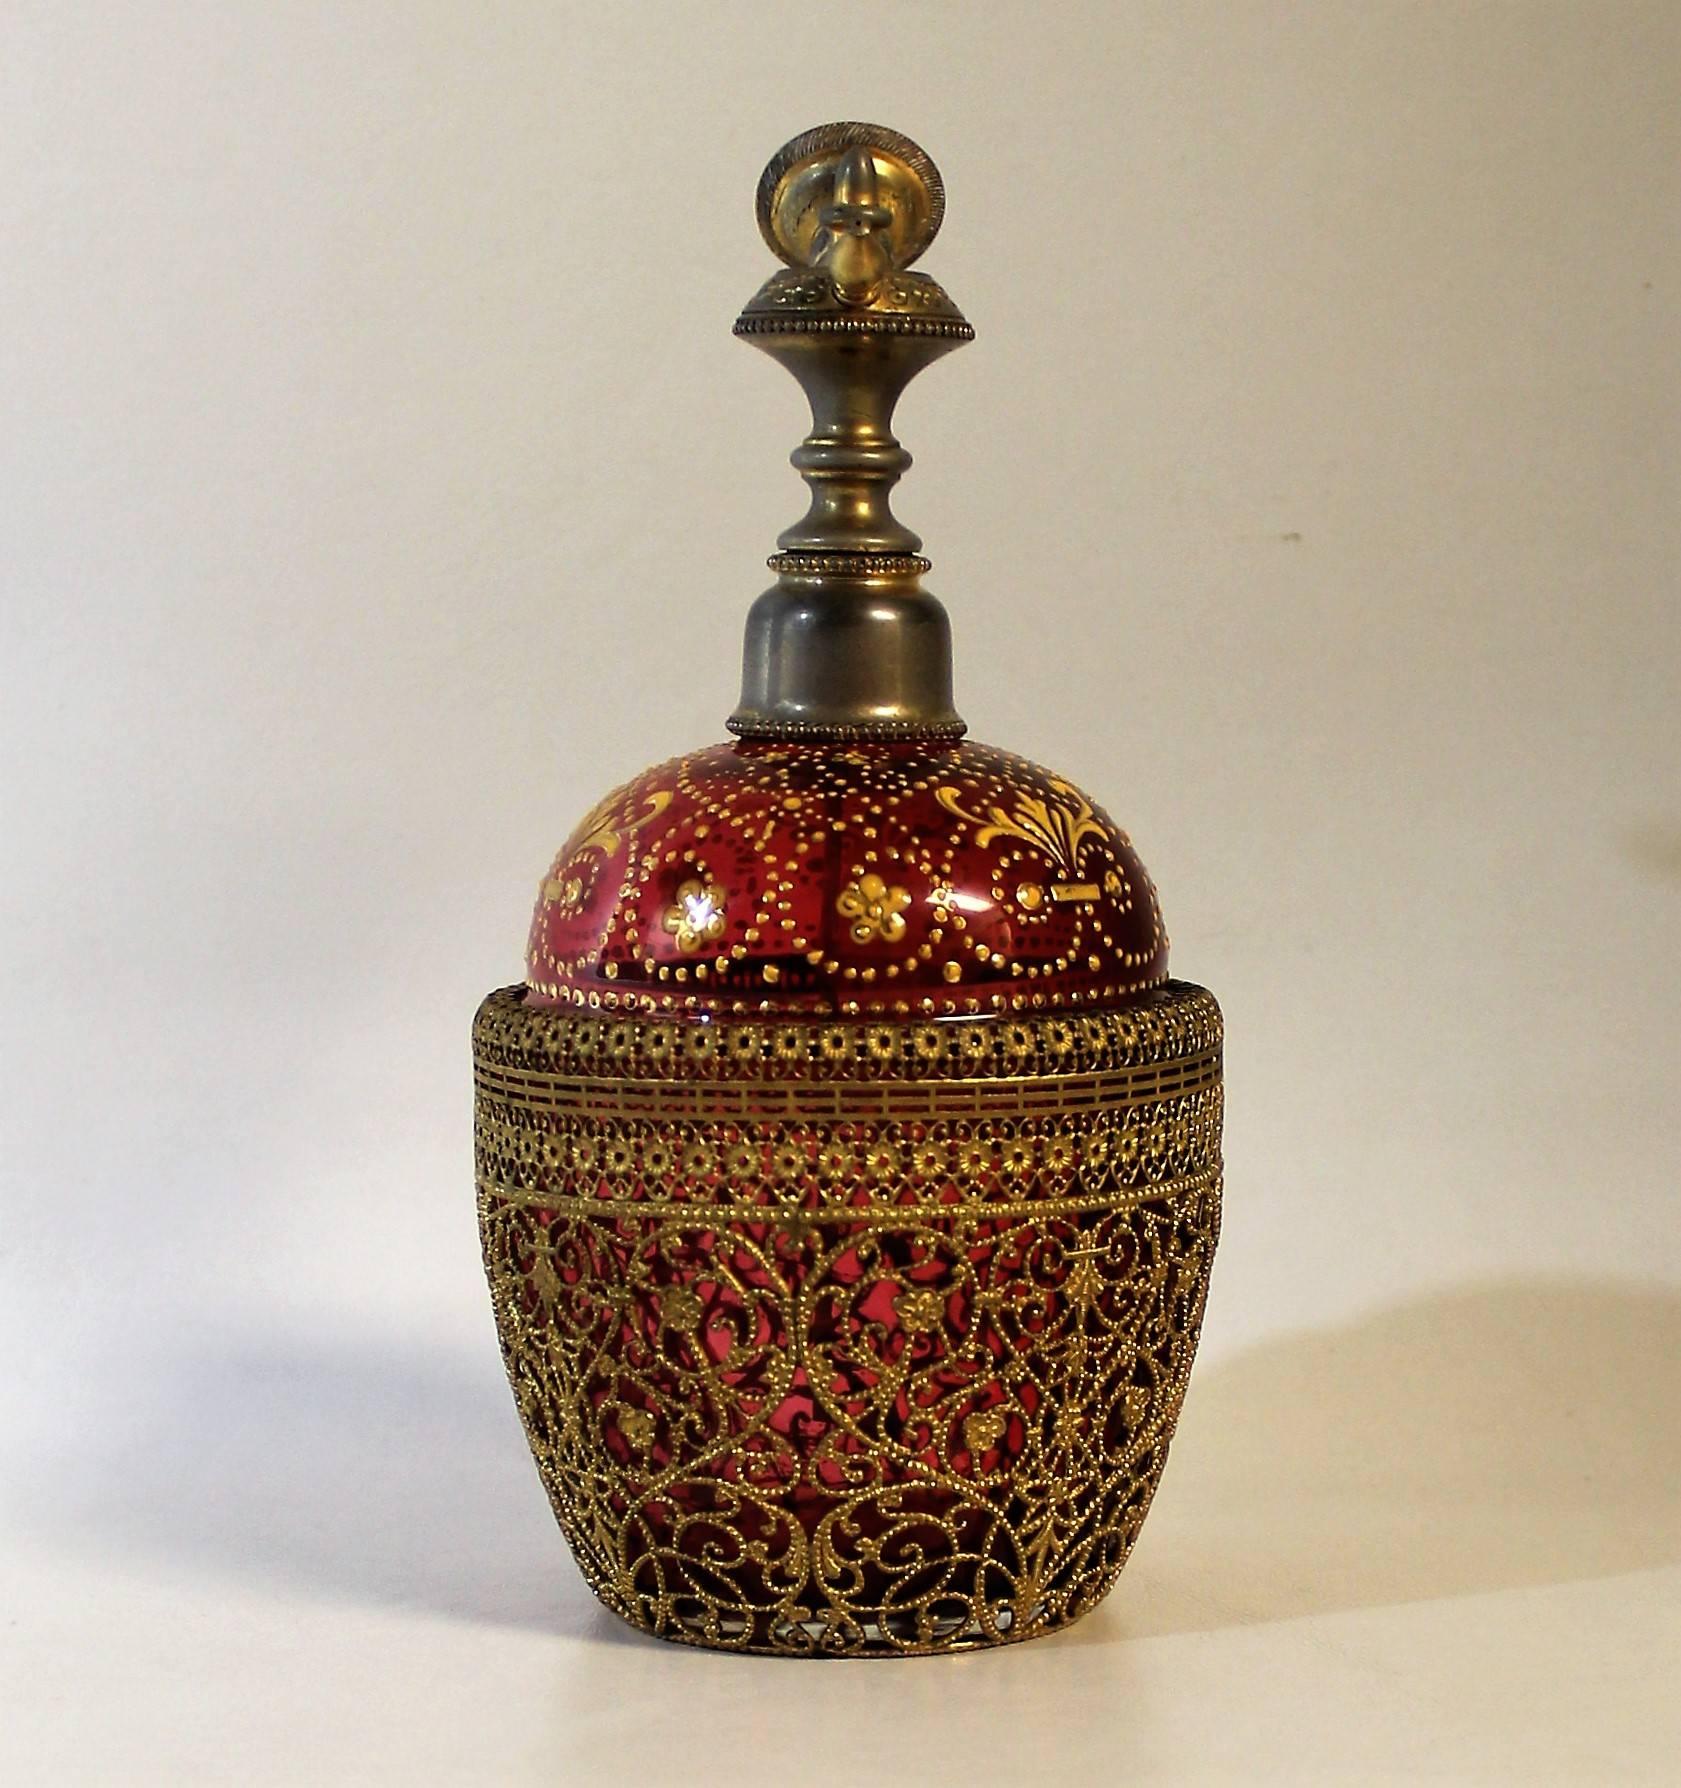 Cranberry glass perfume bottle with filigree and gold enamel.